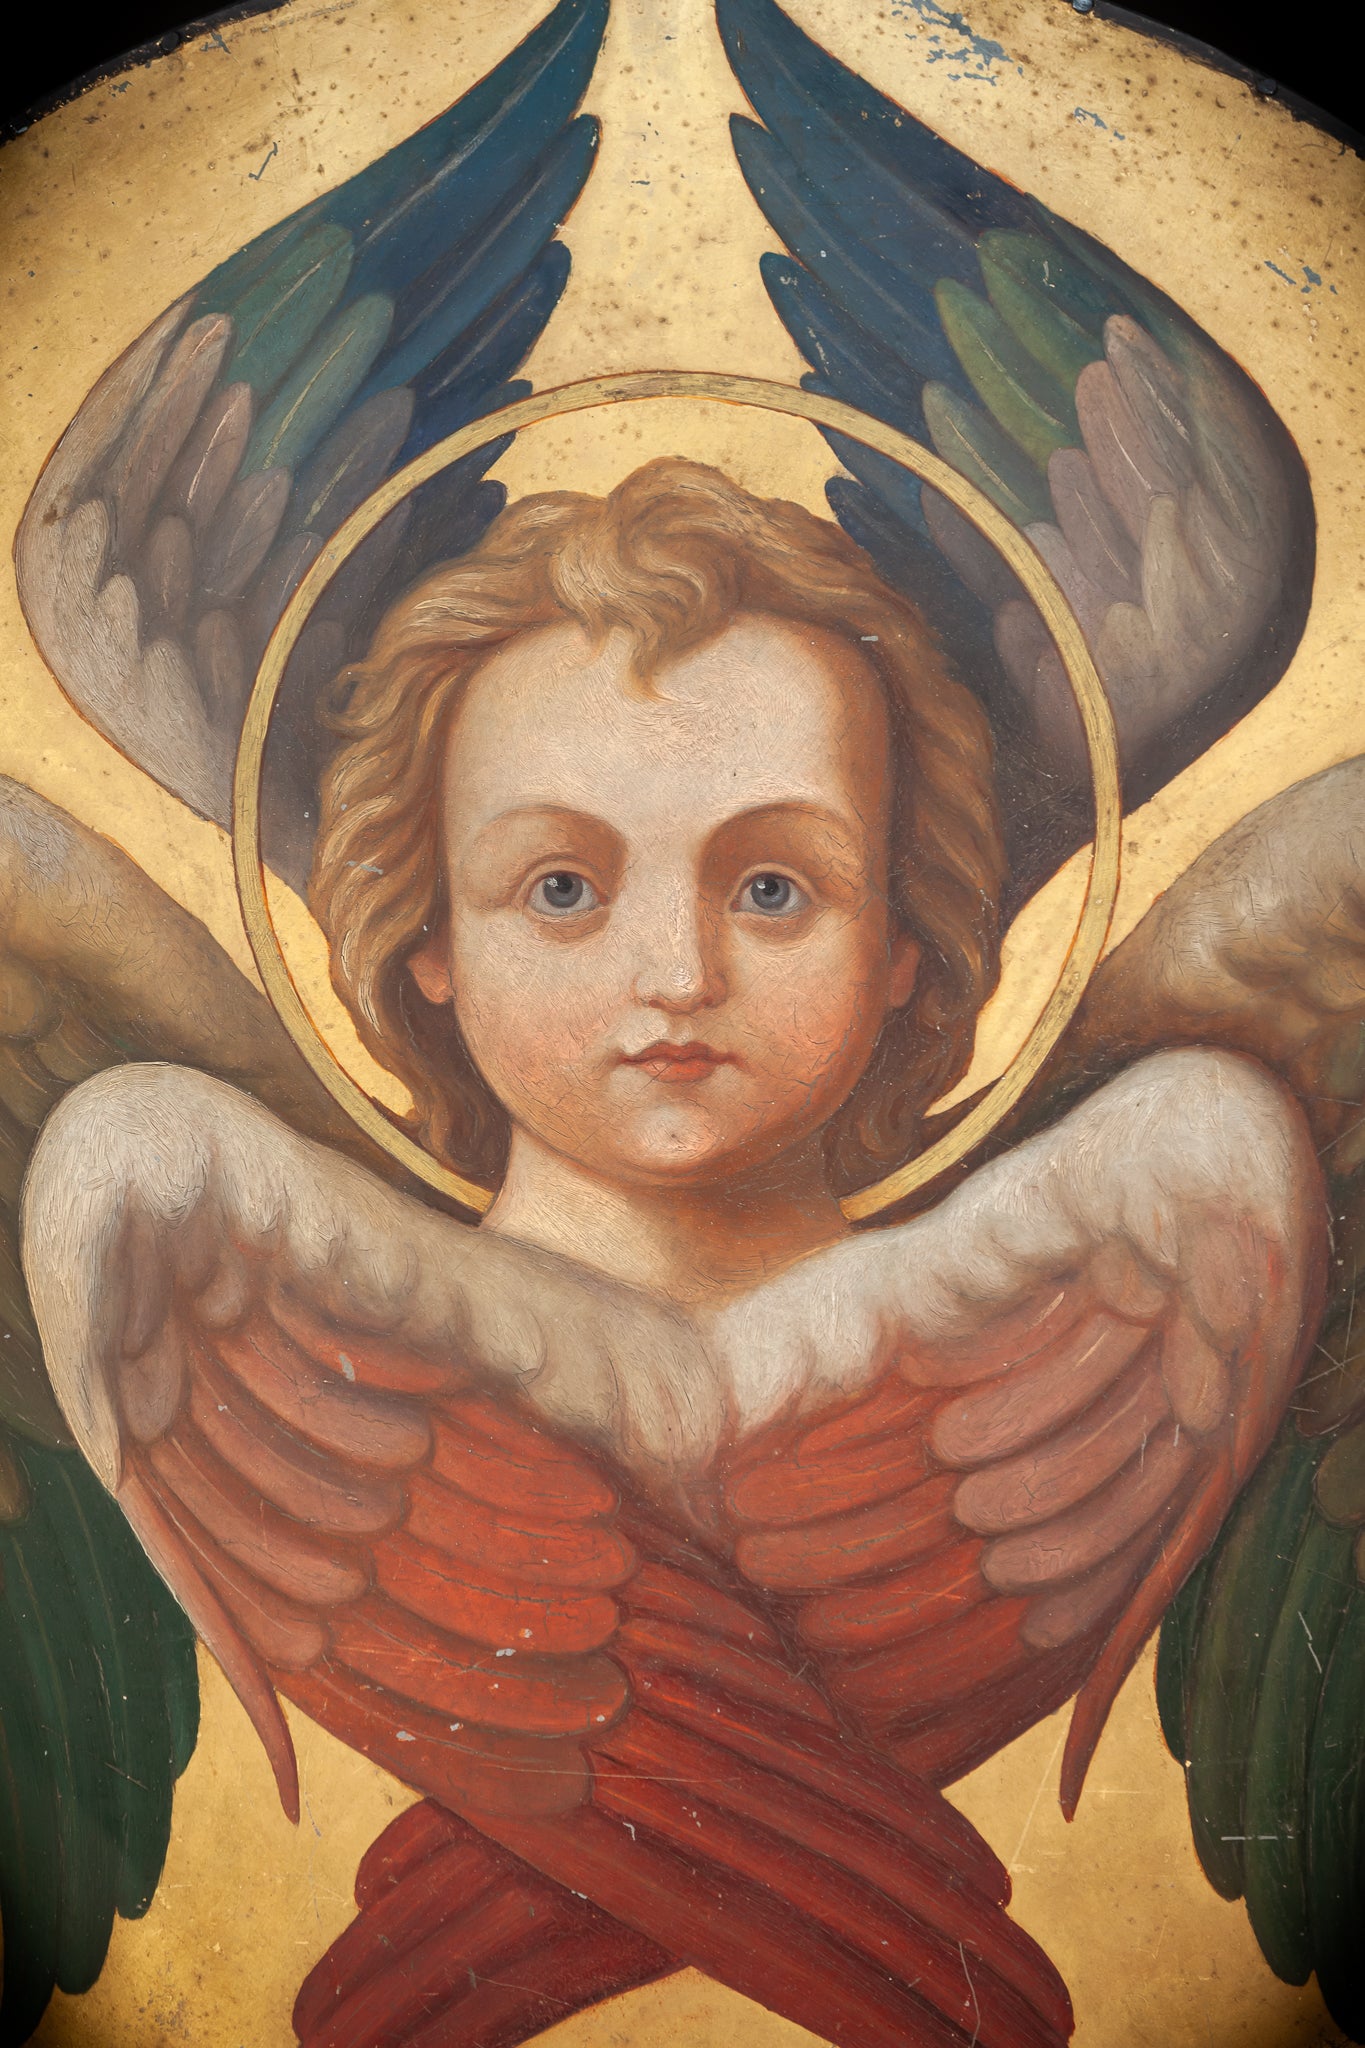 Angel Painting on Metal Sheet | 1800s Antique | 23.8" / 60.5 cm